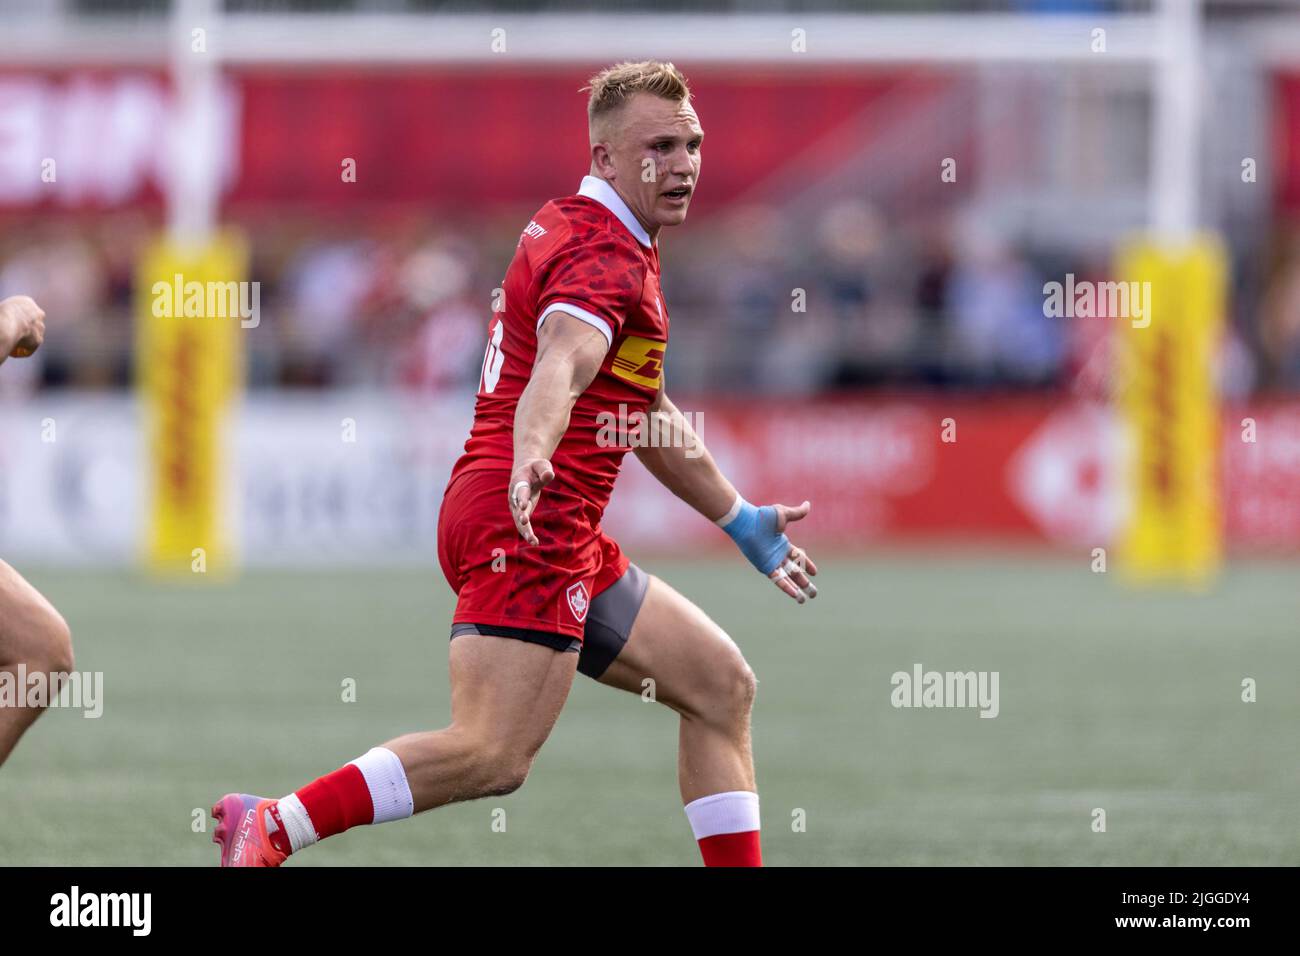 Ottawa, Canada. 10 Jul 2022. B. LESAGE (13) of Canada in the Spain at Canada Men’s World Rugby match played at TD Place Stadium in Ottawa, Canada. Spain won the game 57-34.. Credit: Sean Burges/Alamy Live News Stock Photo